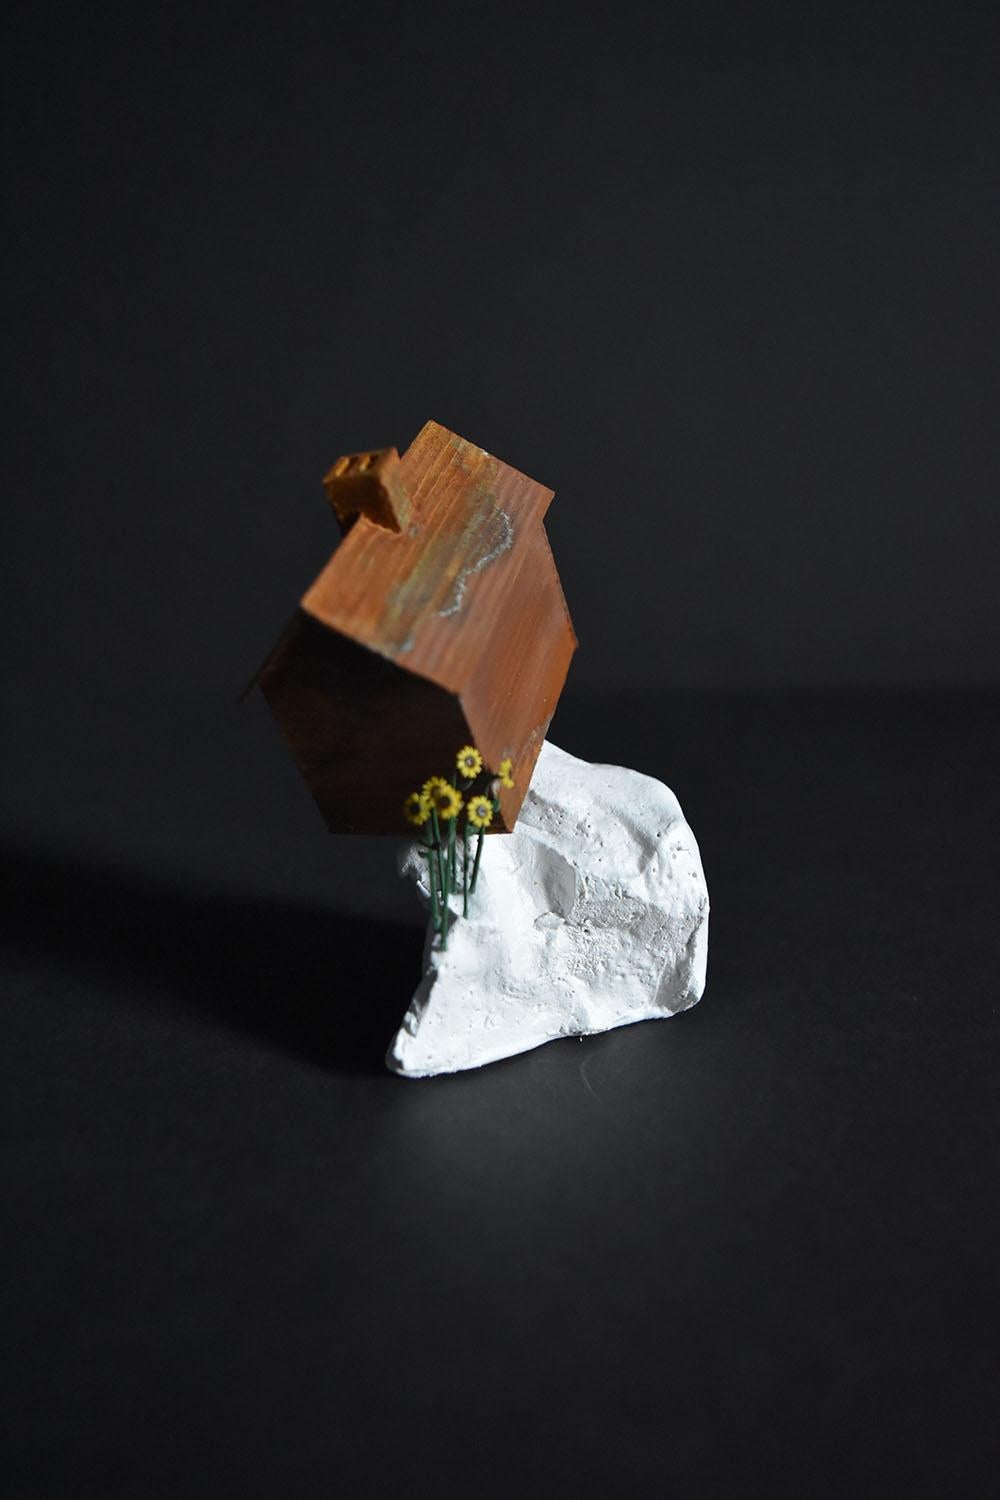 “Precarious Ledge” by Tatiana Flis is a 3 x 2 x 2.5 inch miniature landscape sculpture of reclaimed wood, plastic, and mixed-media materials. An orange, rust, and sea foam green patina colored home with a double chimney sits on top of a white empty